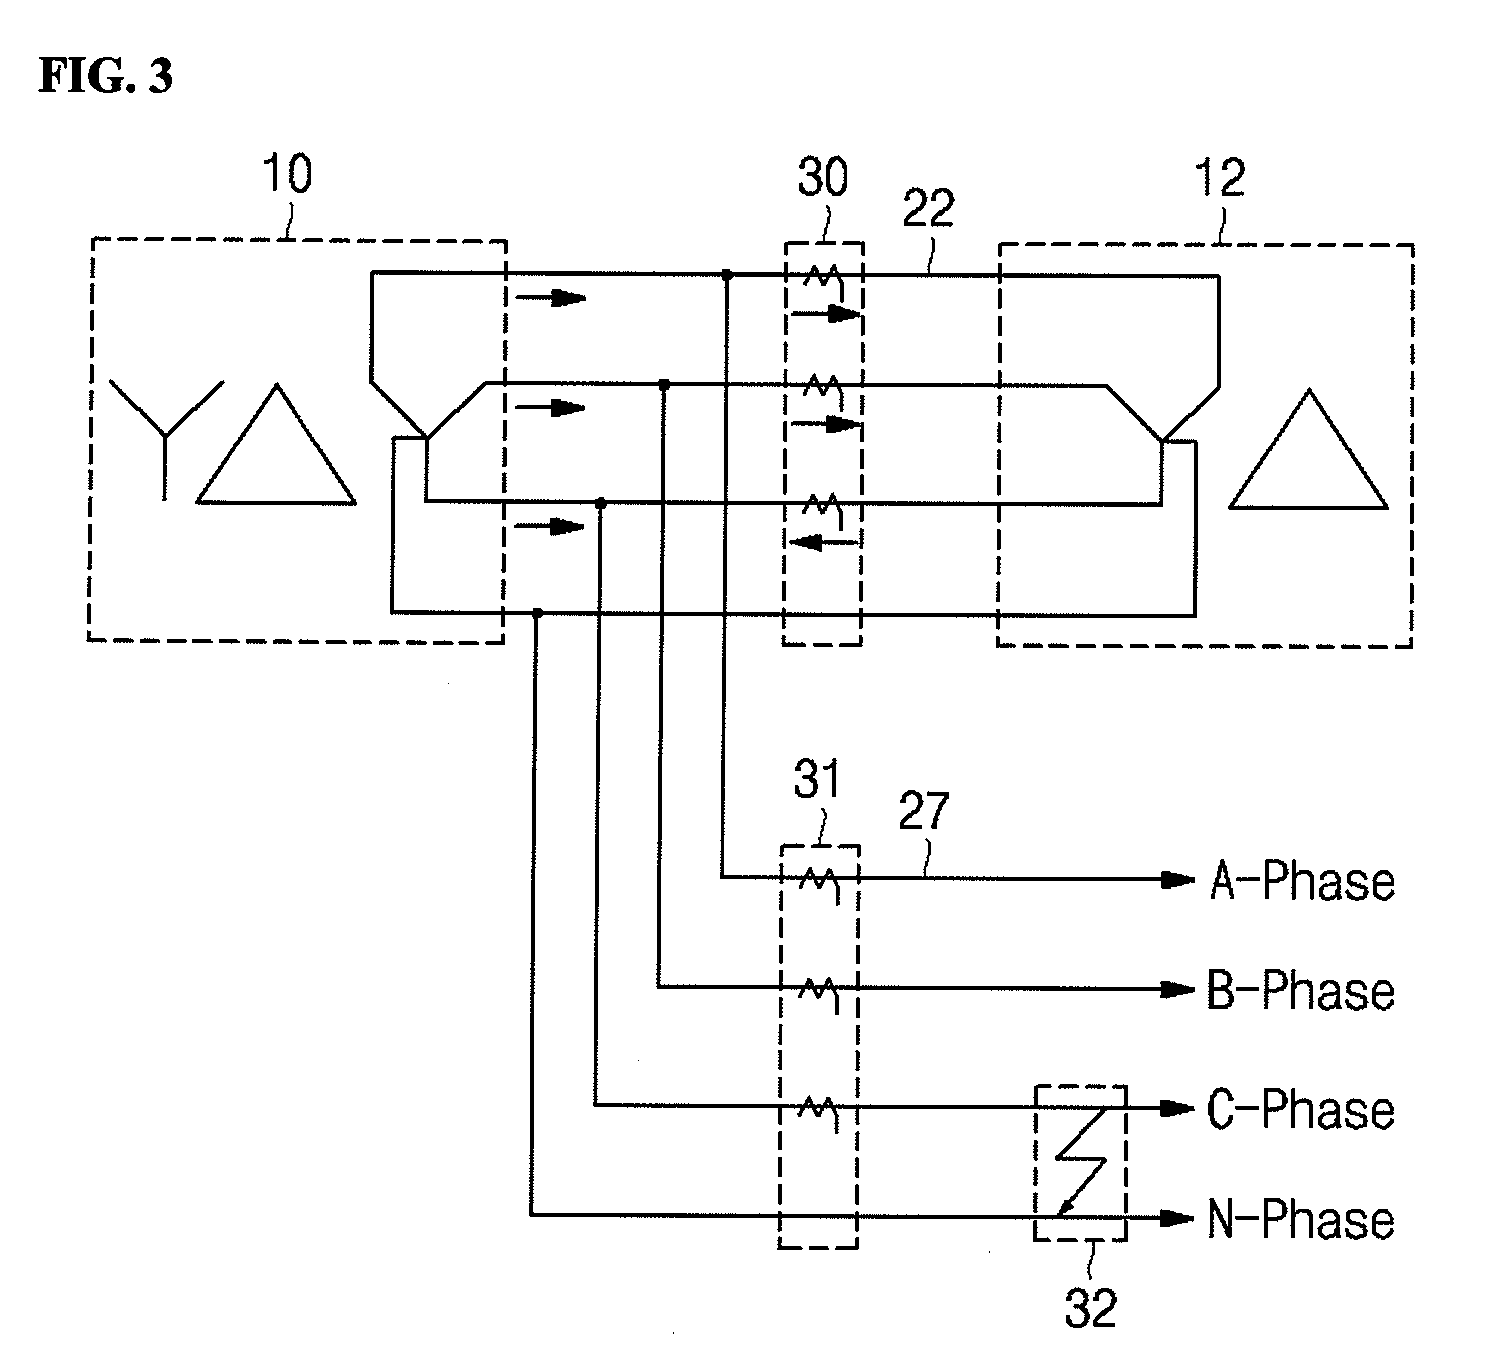 Control method for preventing malfunction of over current ground relay due to reverse power